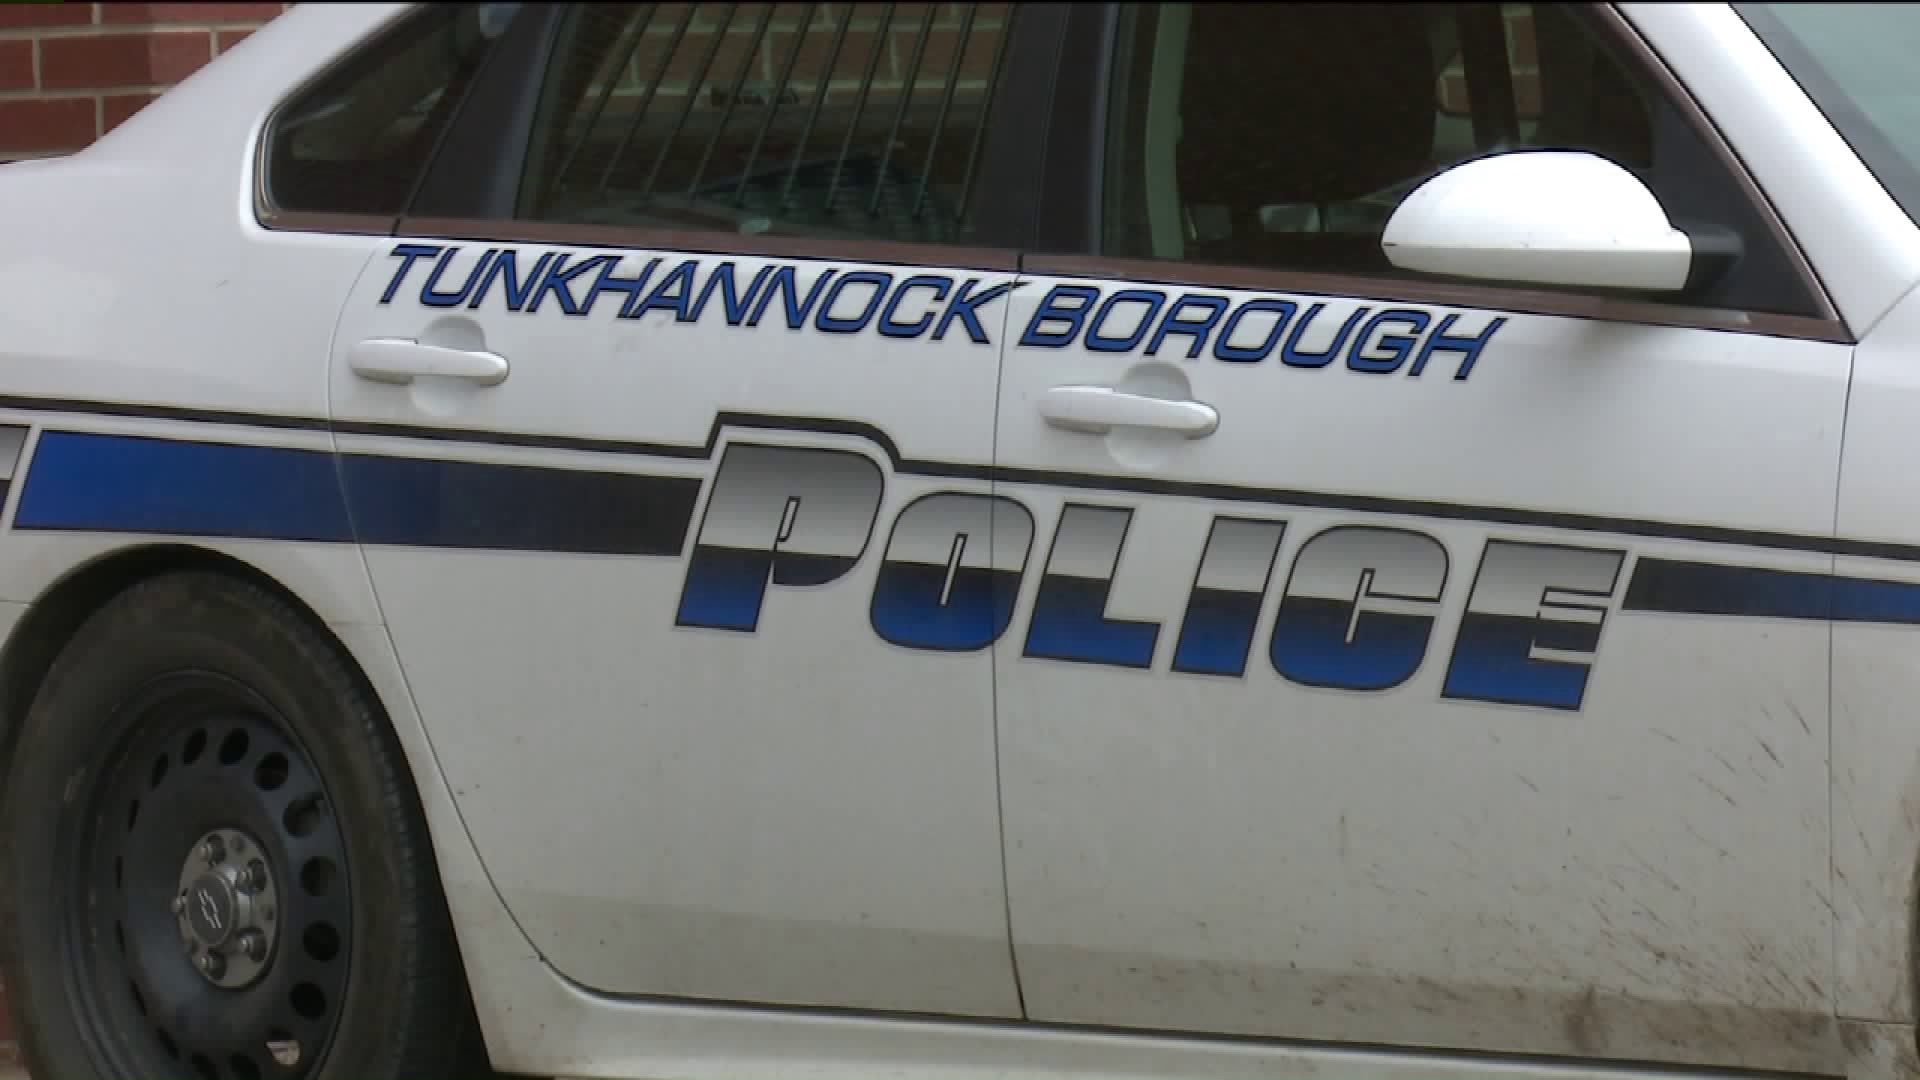 Bicyclist in Critical Condition After Hit and Run in Tunkhannock